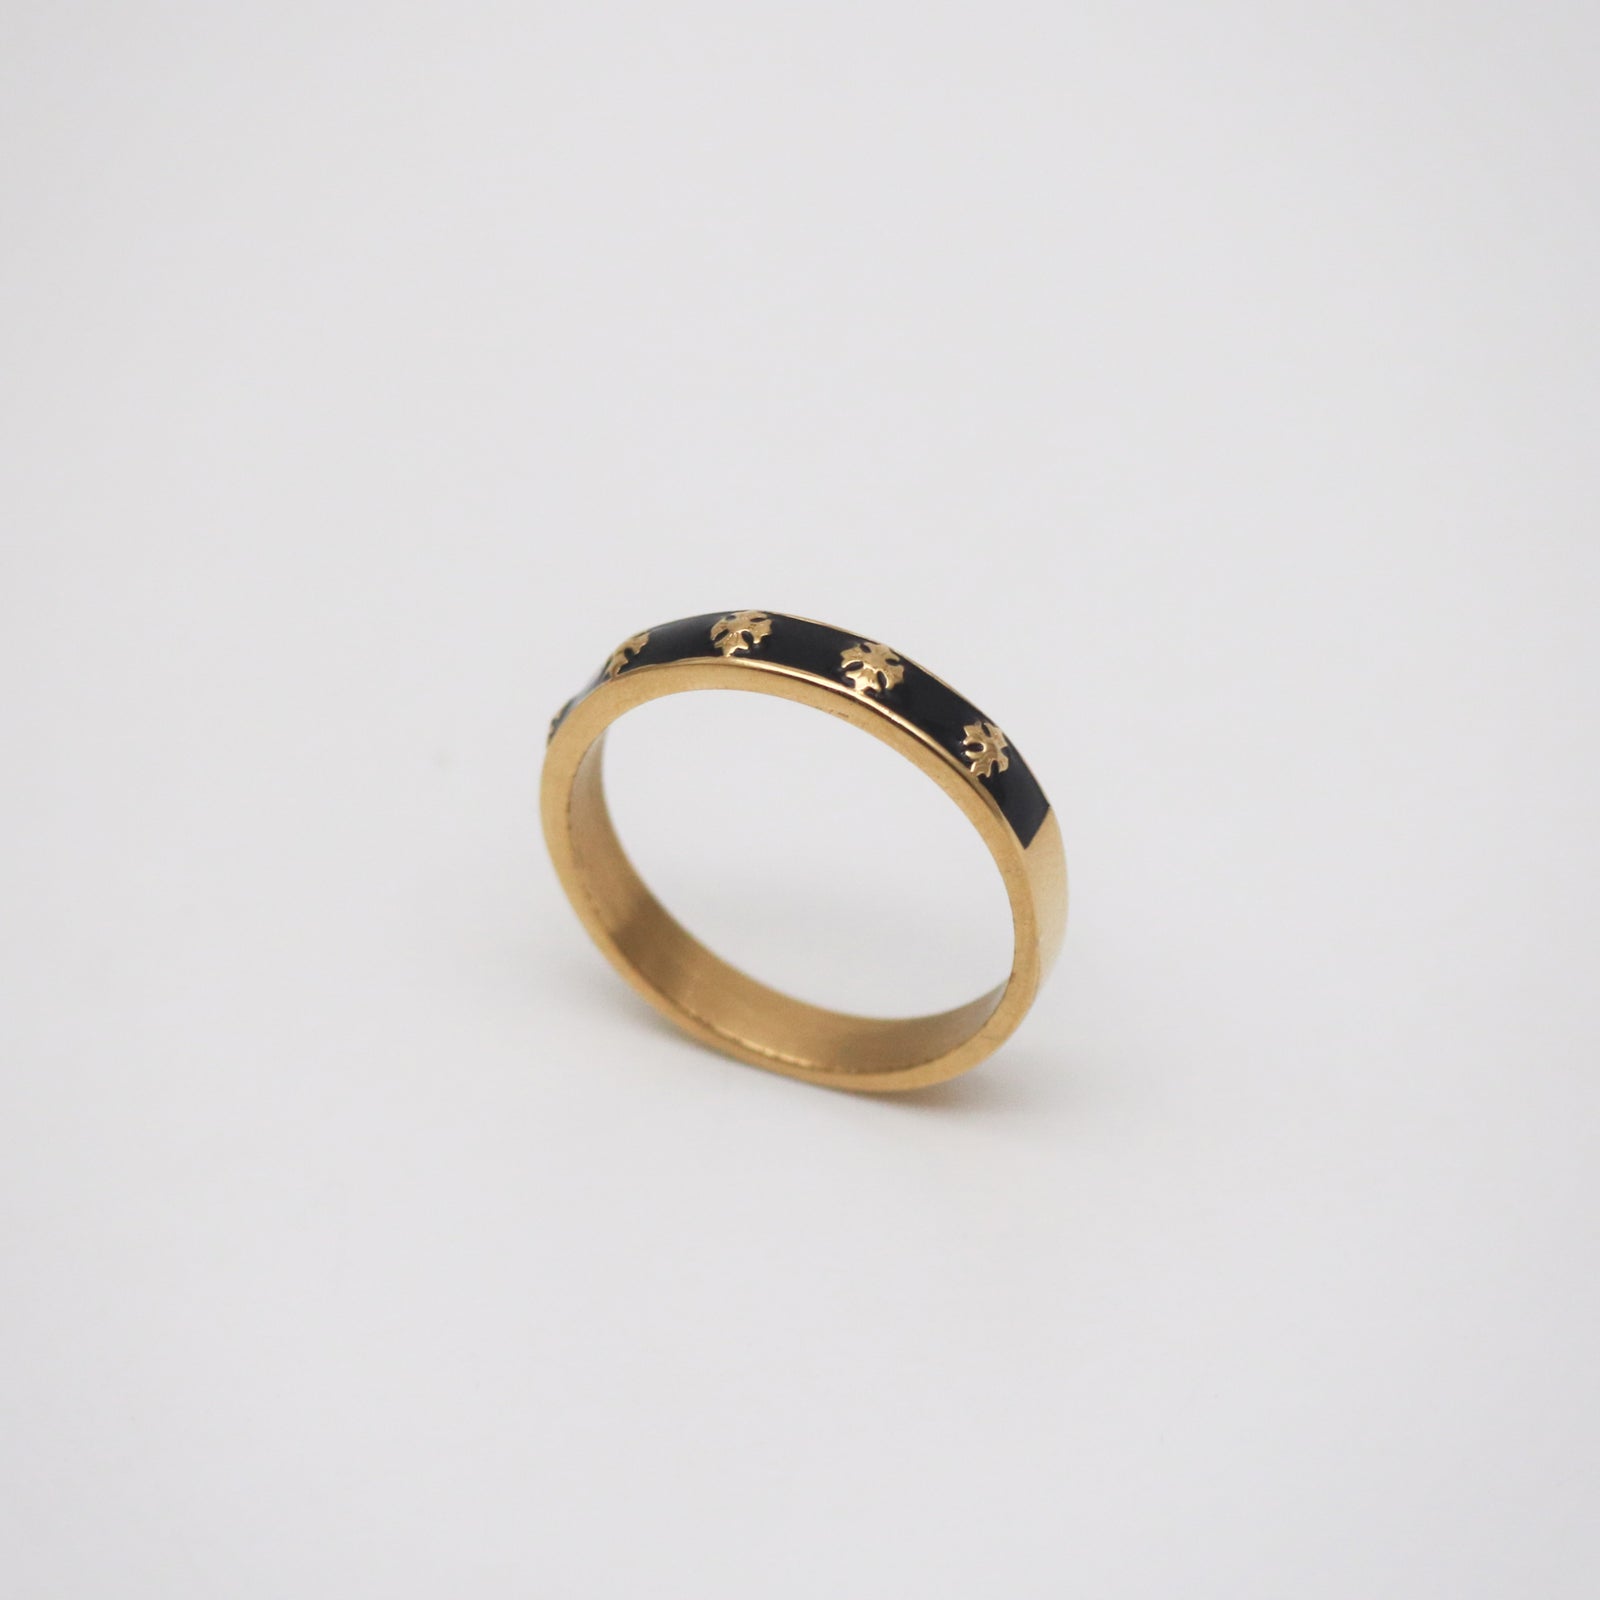 thin gold band ring with black enamel and cross patterns